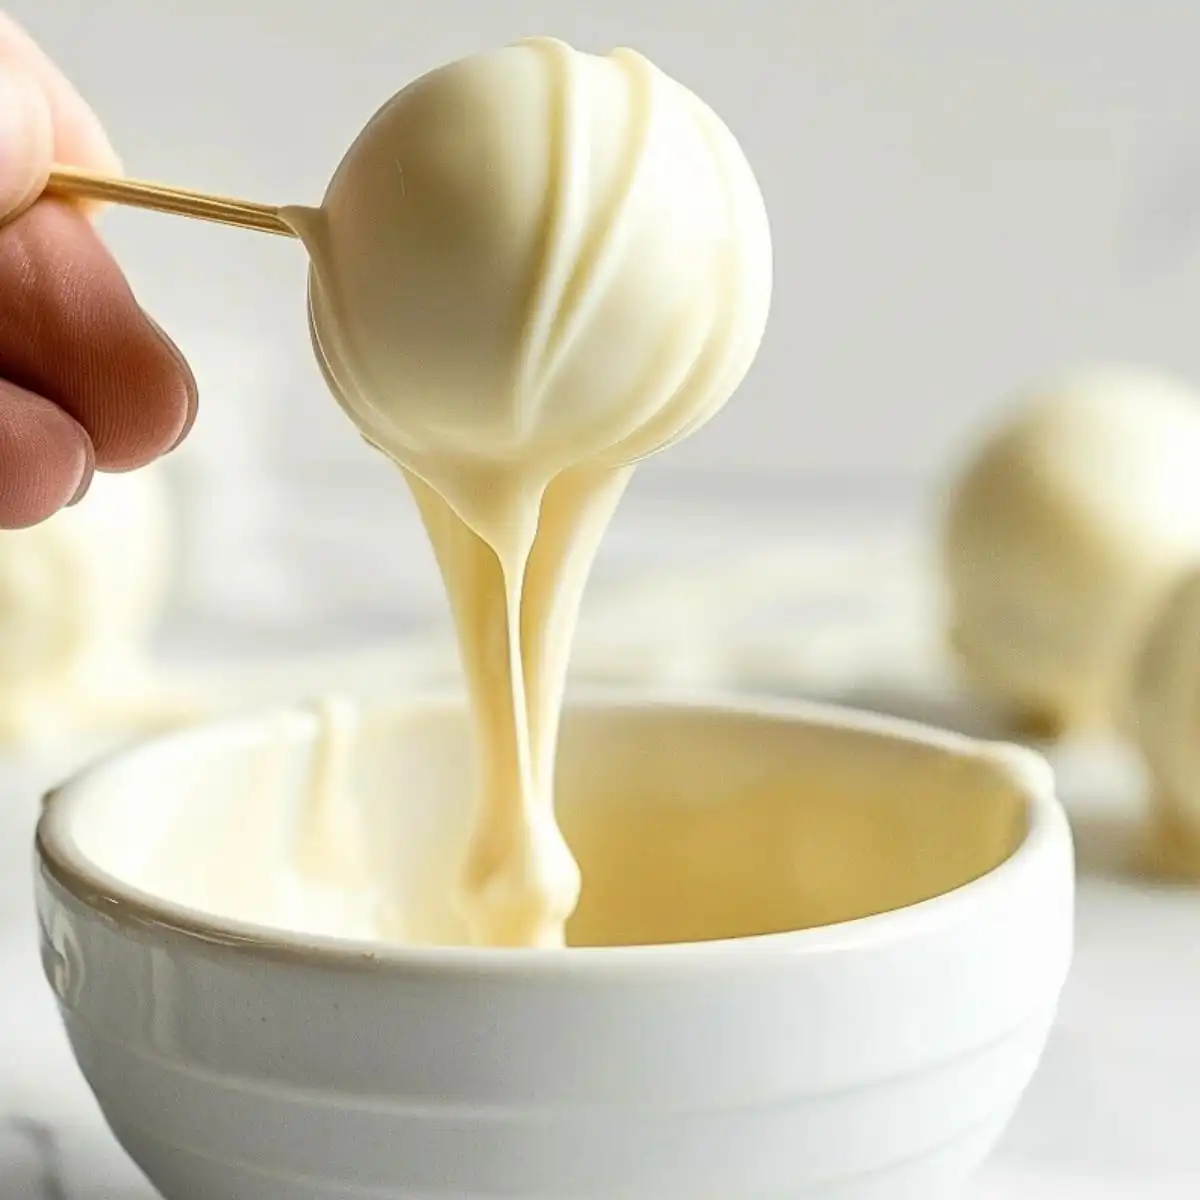 White chocolate truffle on stick dipped on a bowl of melted white chocolate.